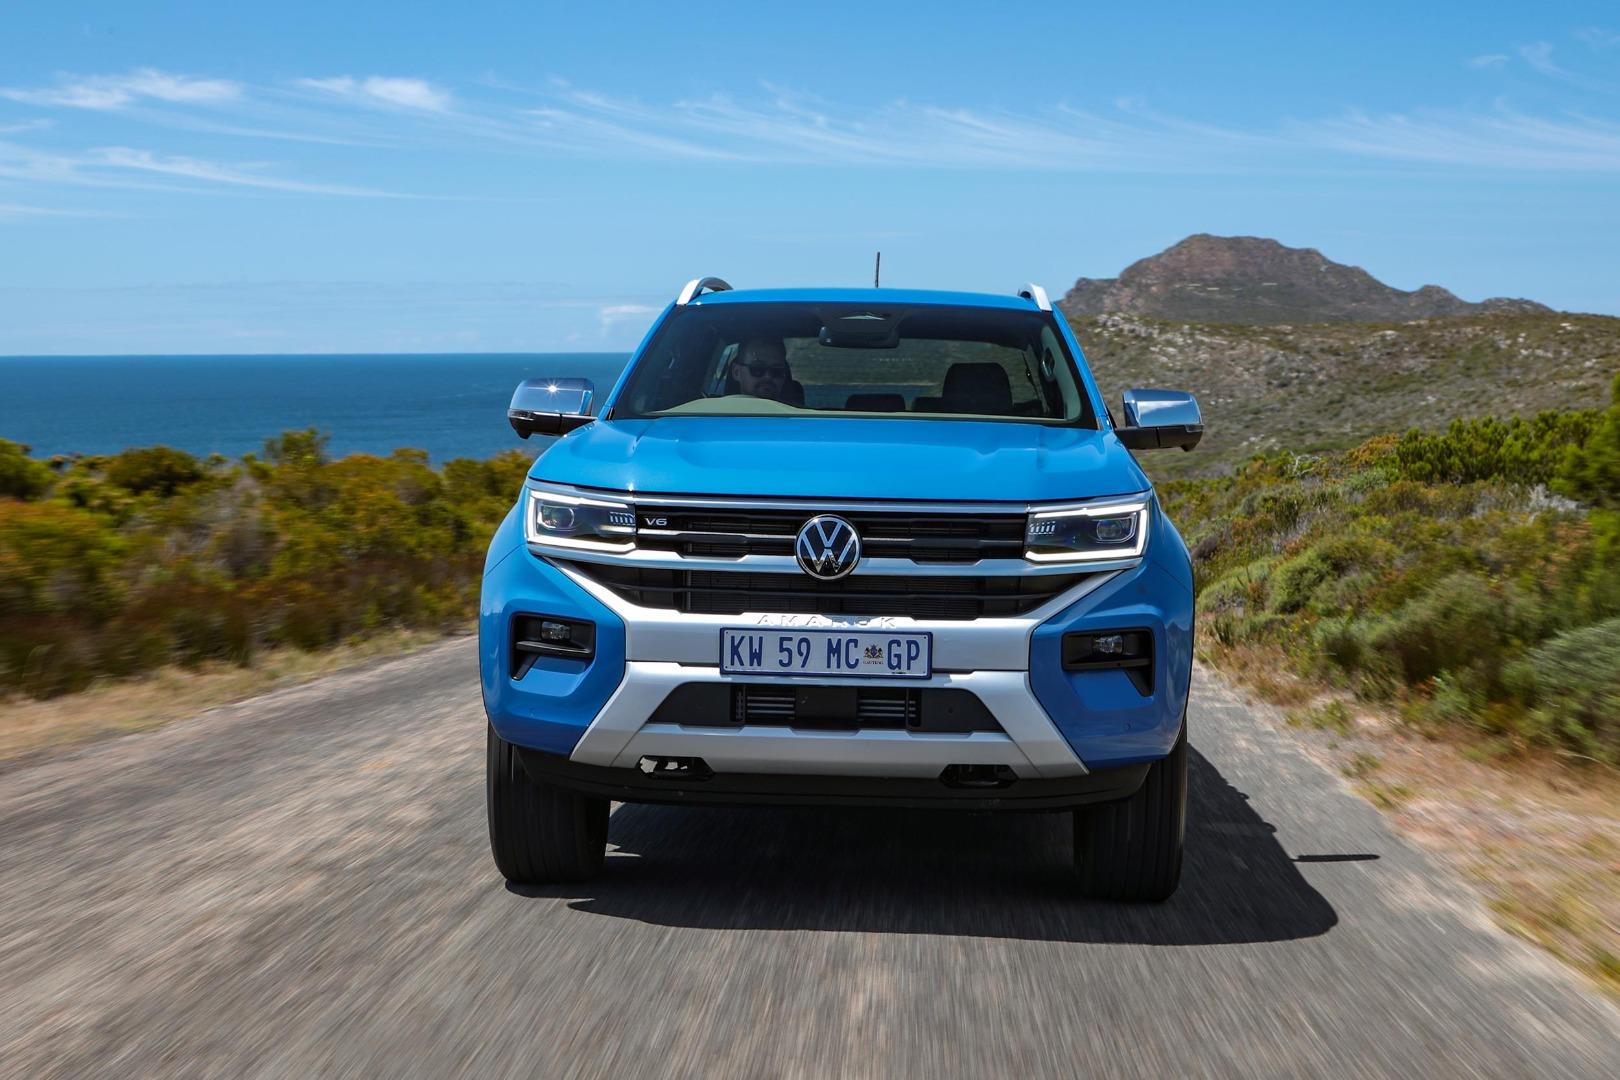 How do I connect my Android phone to my VW Amarok? - Buying a Car